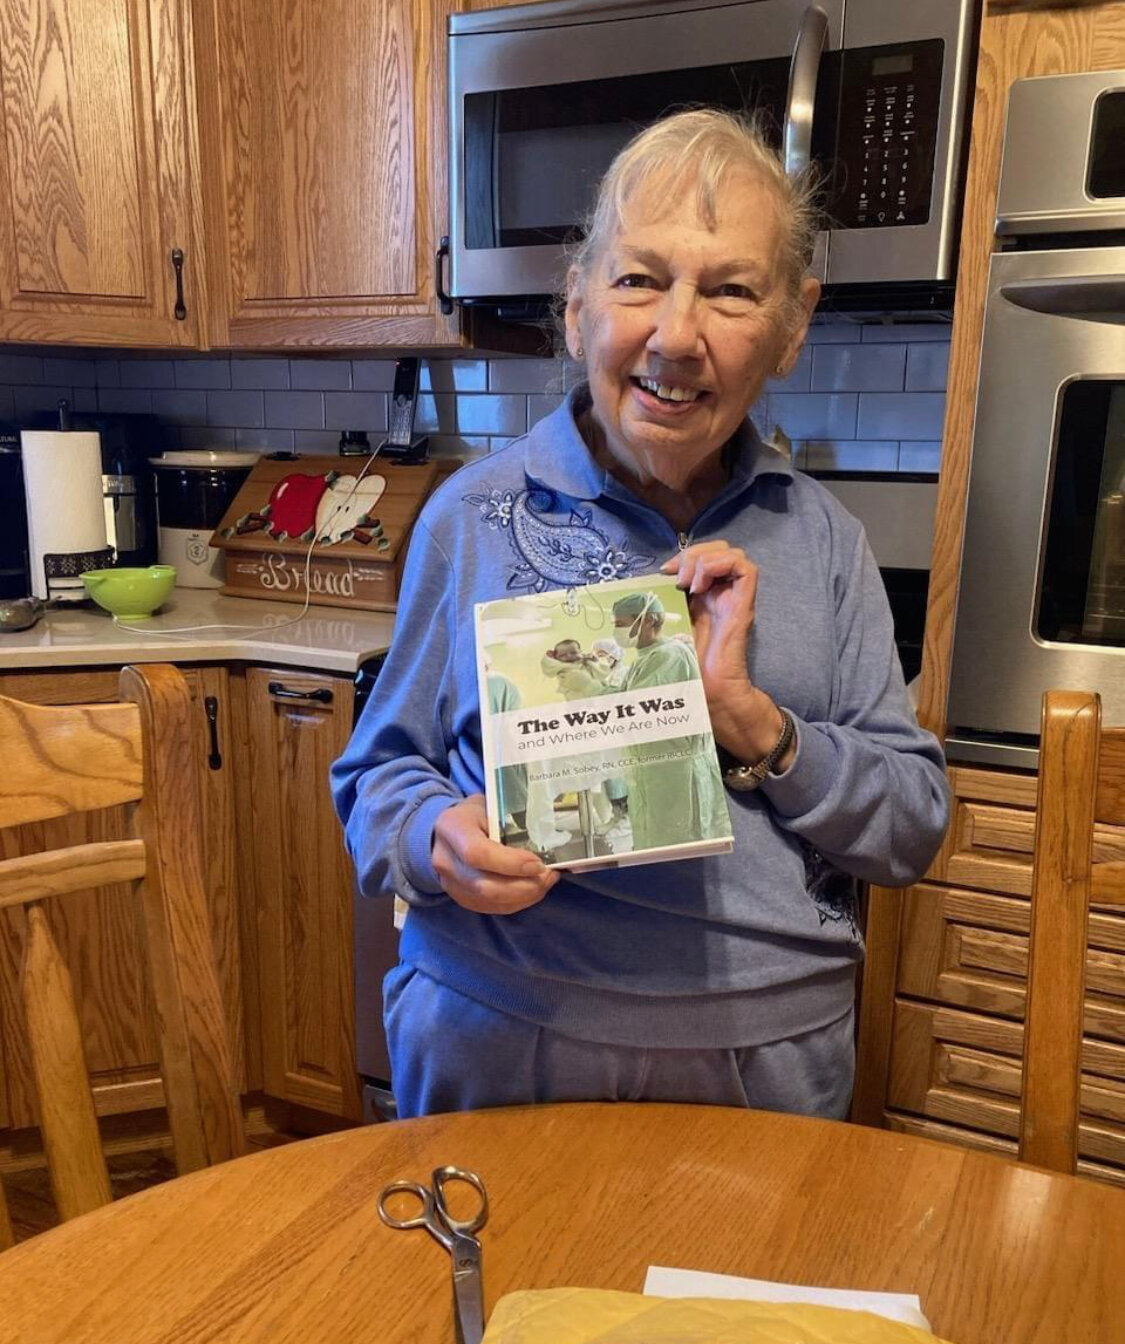 Barbara Sobey has become a published author at age 80, documenting in her new book how labor and delivery changed over the course of her 29 years of having children